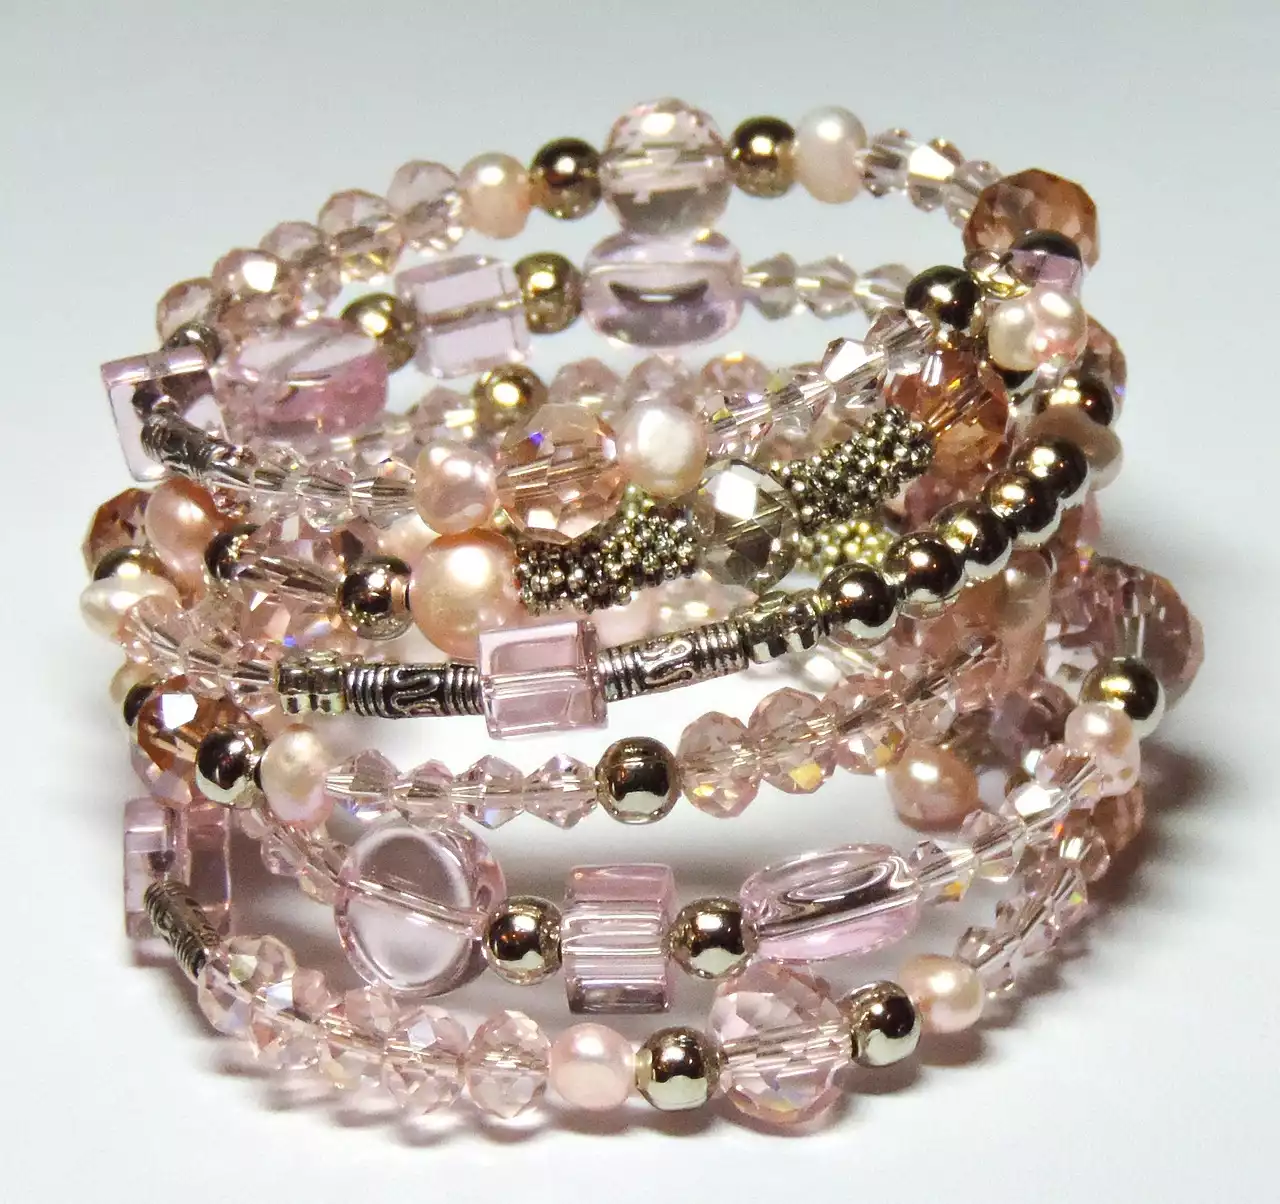 10 Reasons to Adorn Your Wrist with Beautiful Bracelets